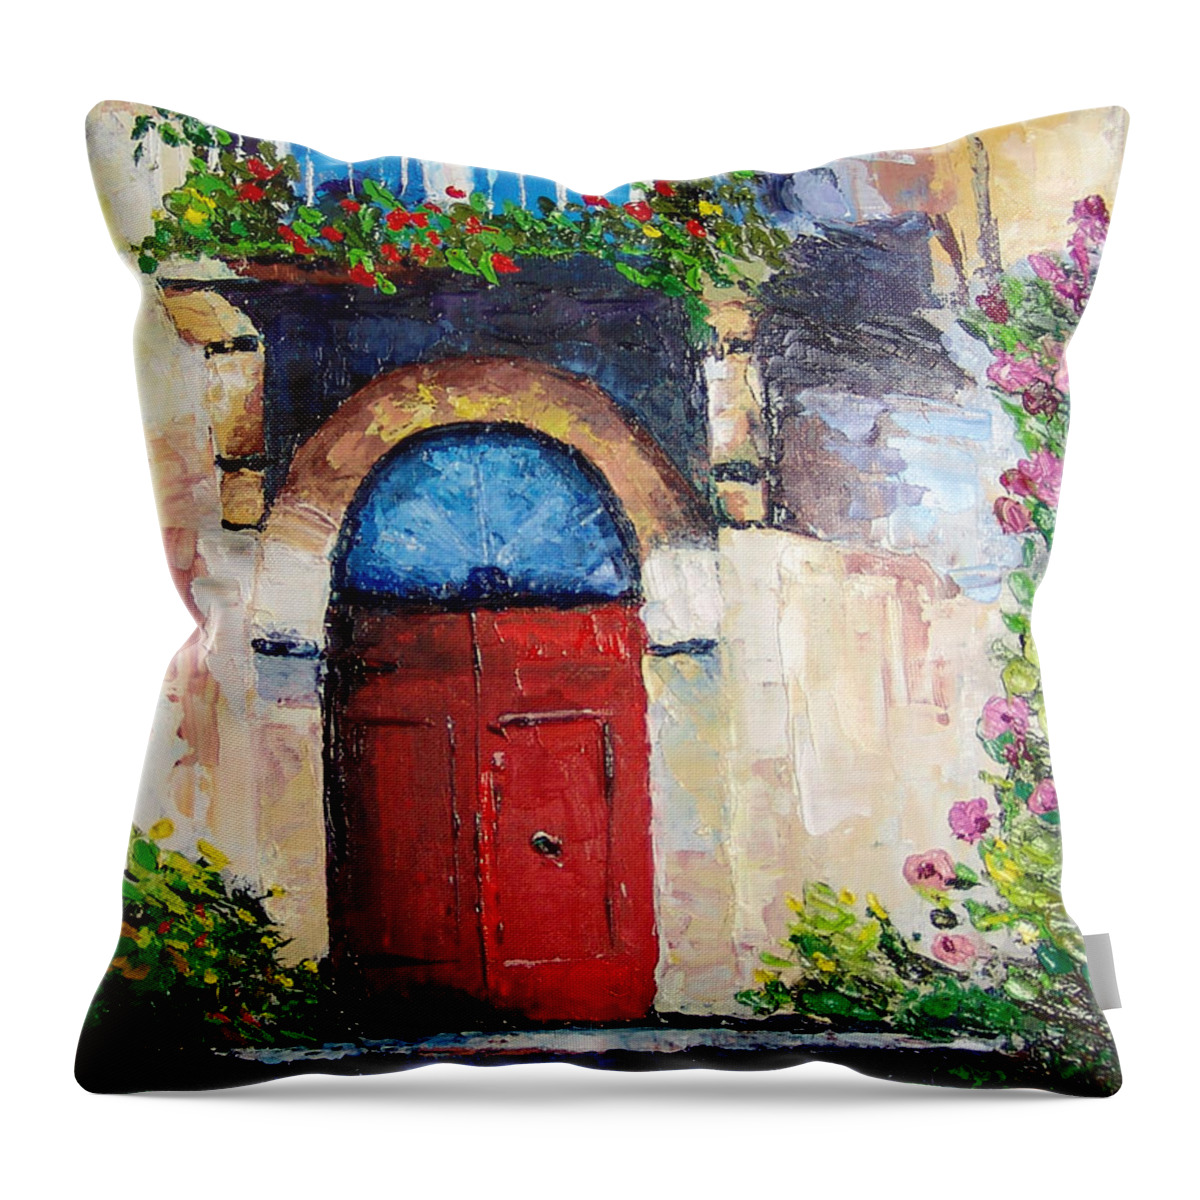 Balcony Throw Pillow featuring the painting Balcony by Janet Garcia